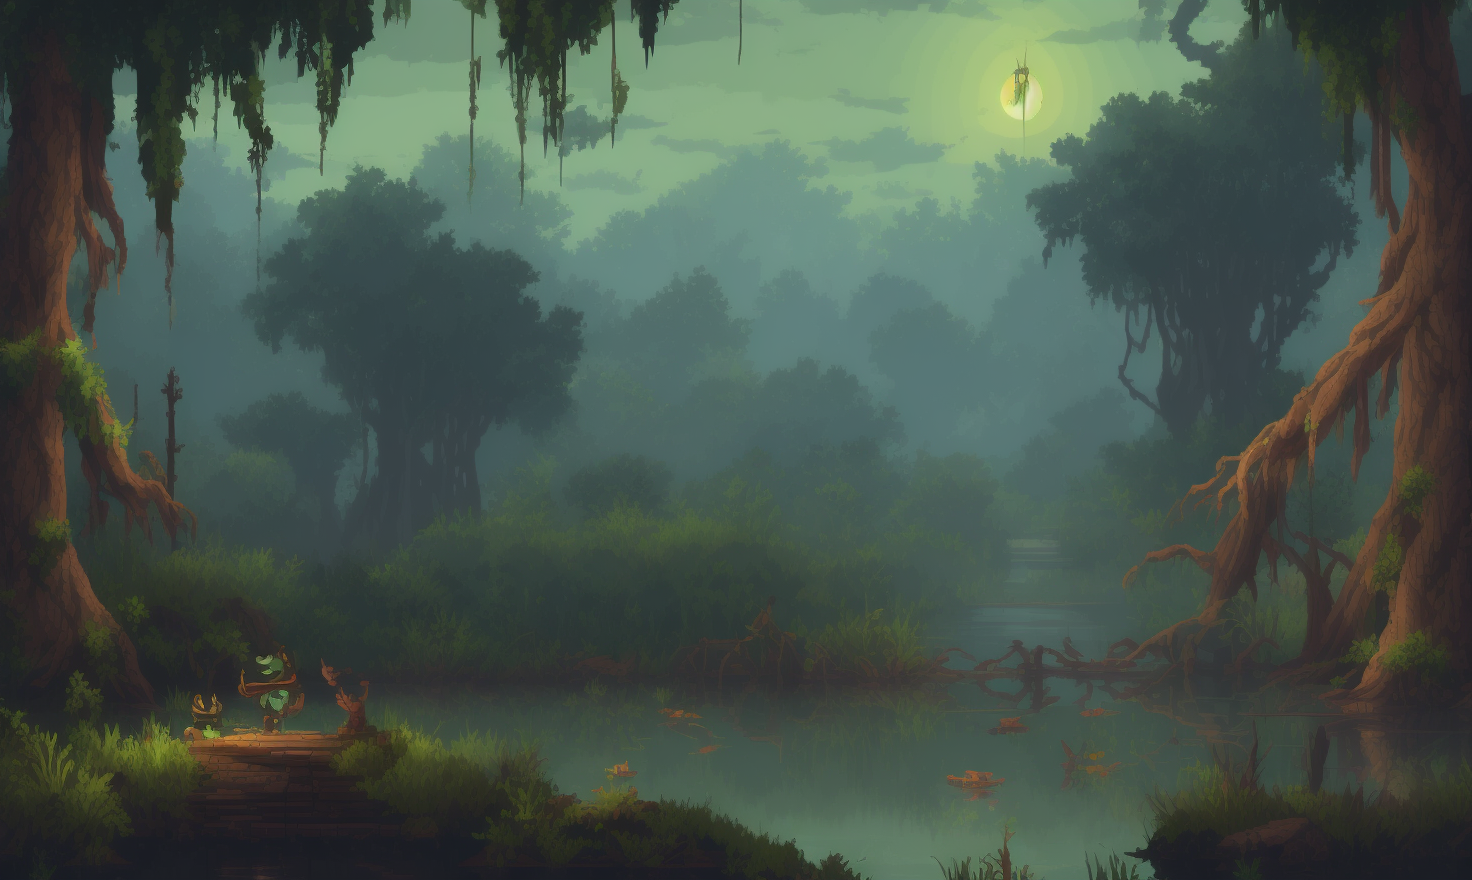 pixelart  video game environment, Produce an image of a steamy and dense swamp, with murky water, tangled vines, and the s...